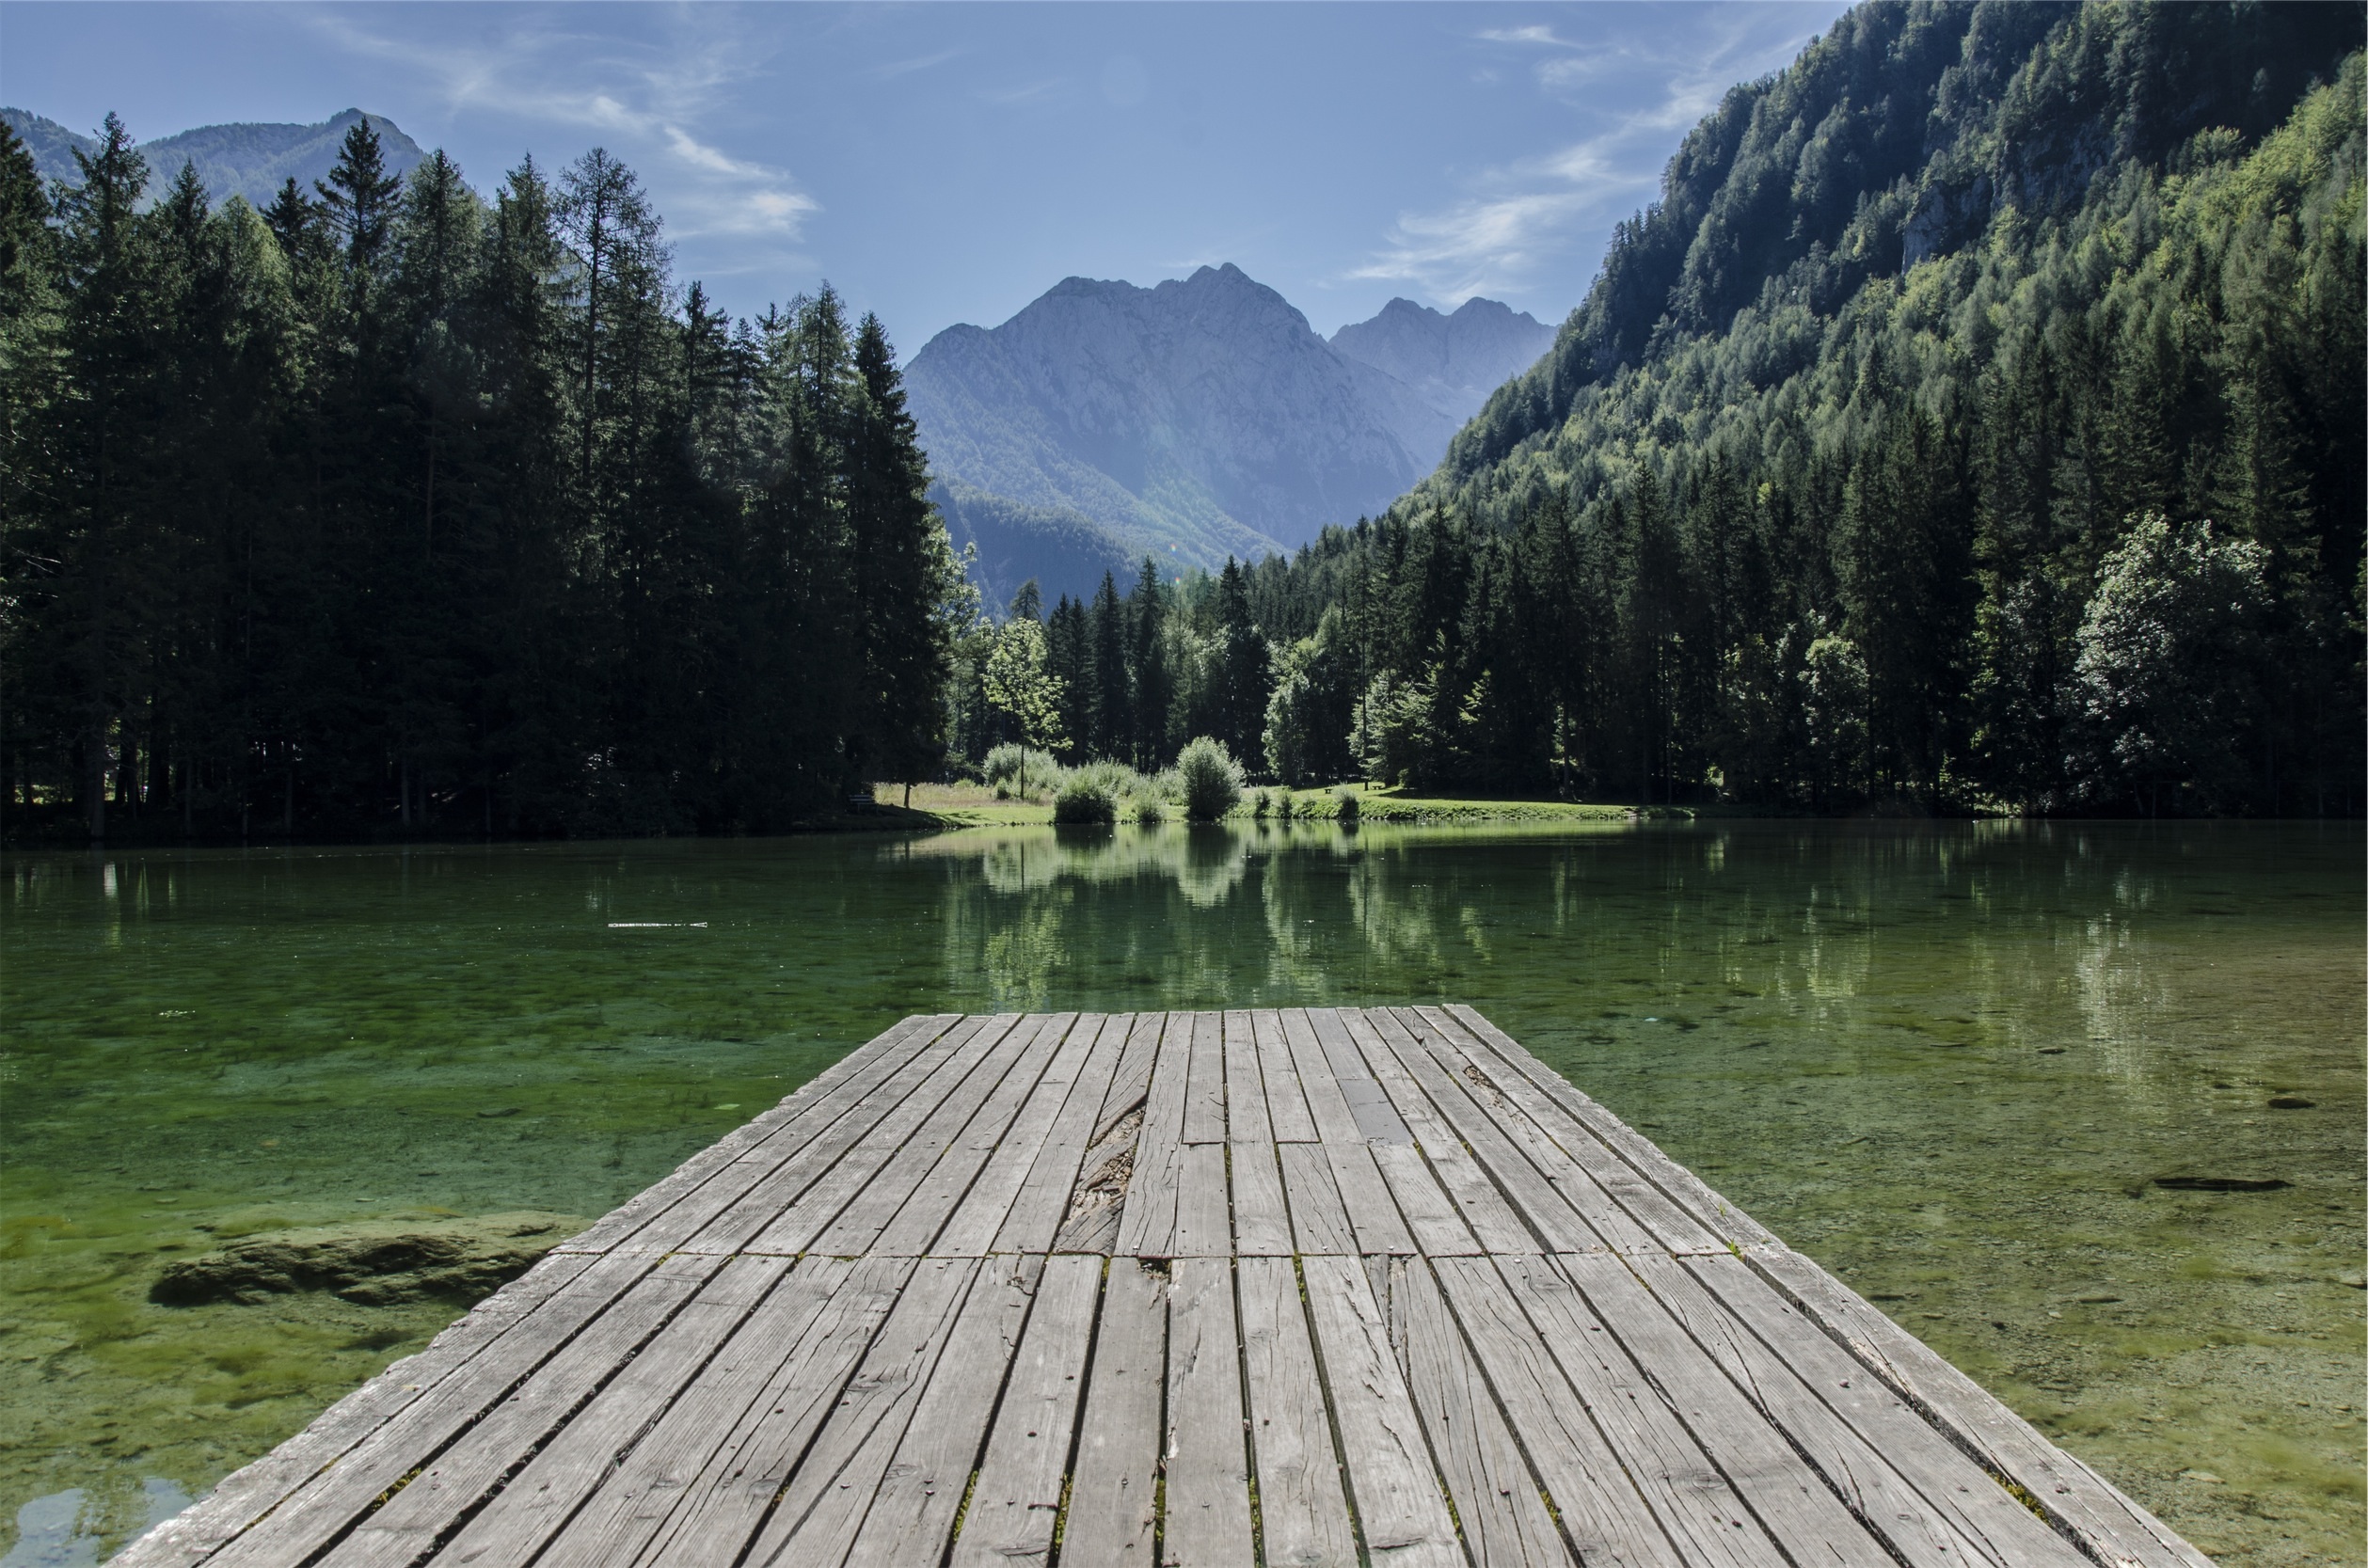 Wooden bridge on a lake in the mountains